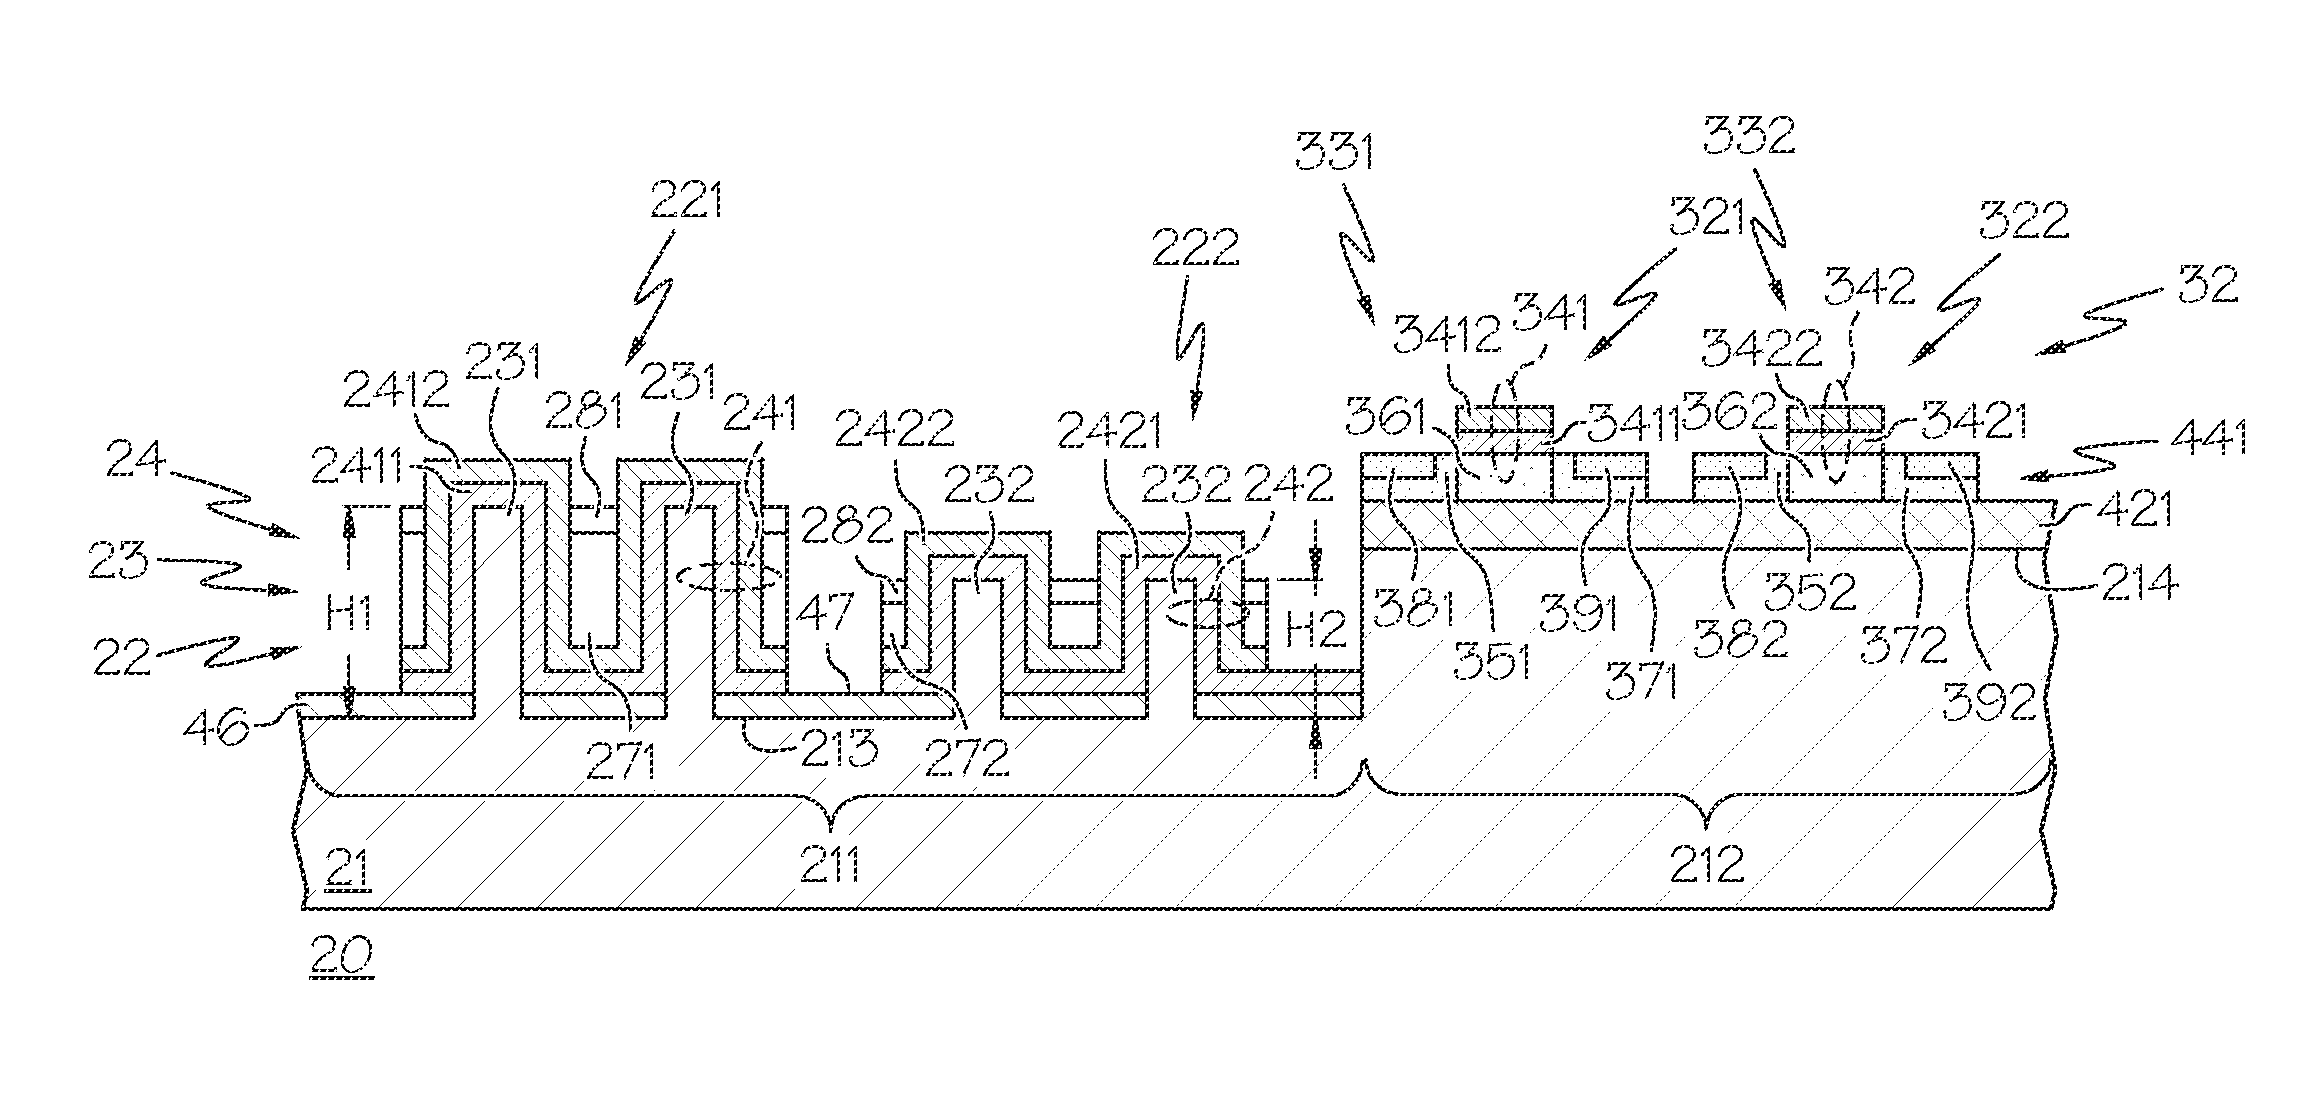 Combined planar fet and fin-fet devices and methods